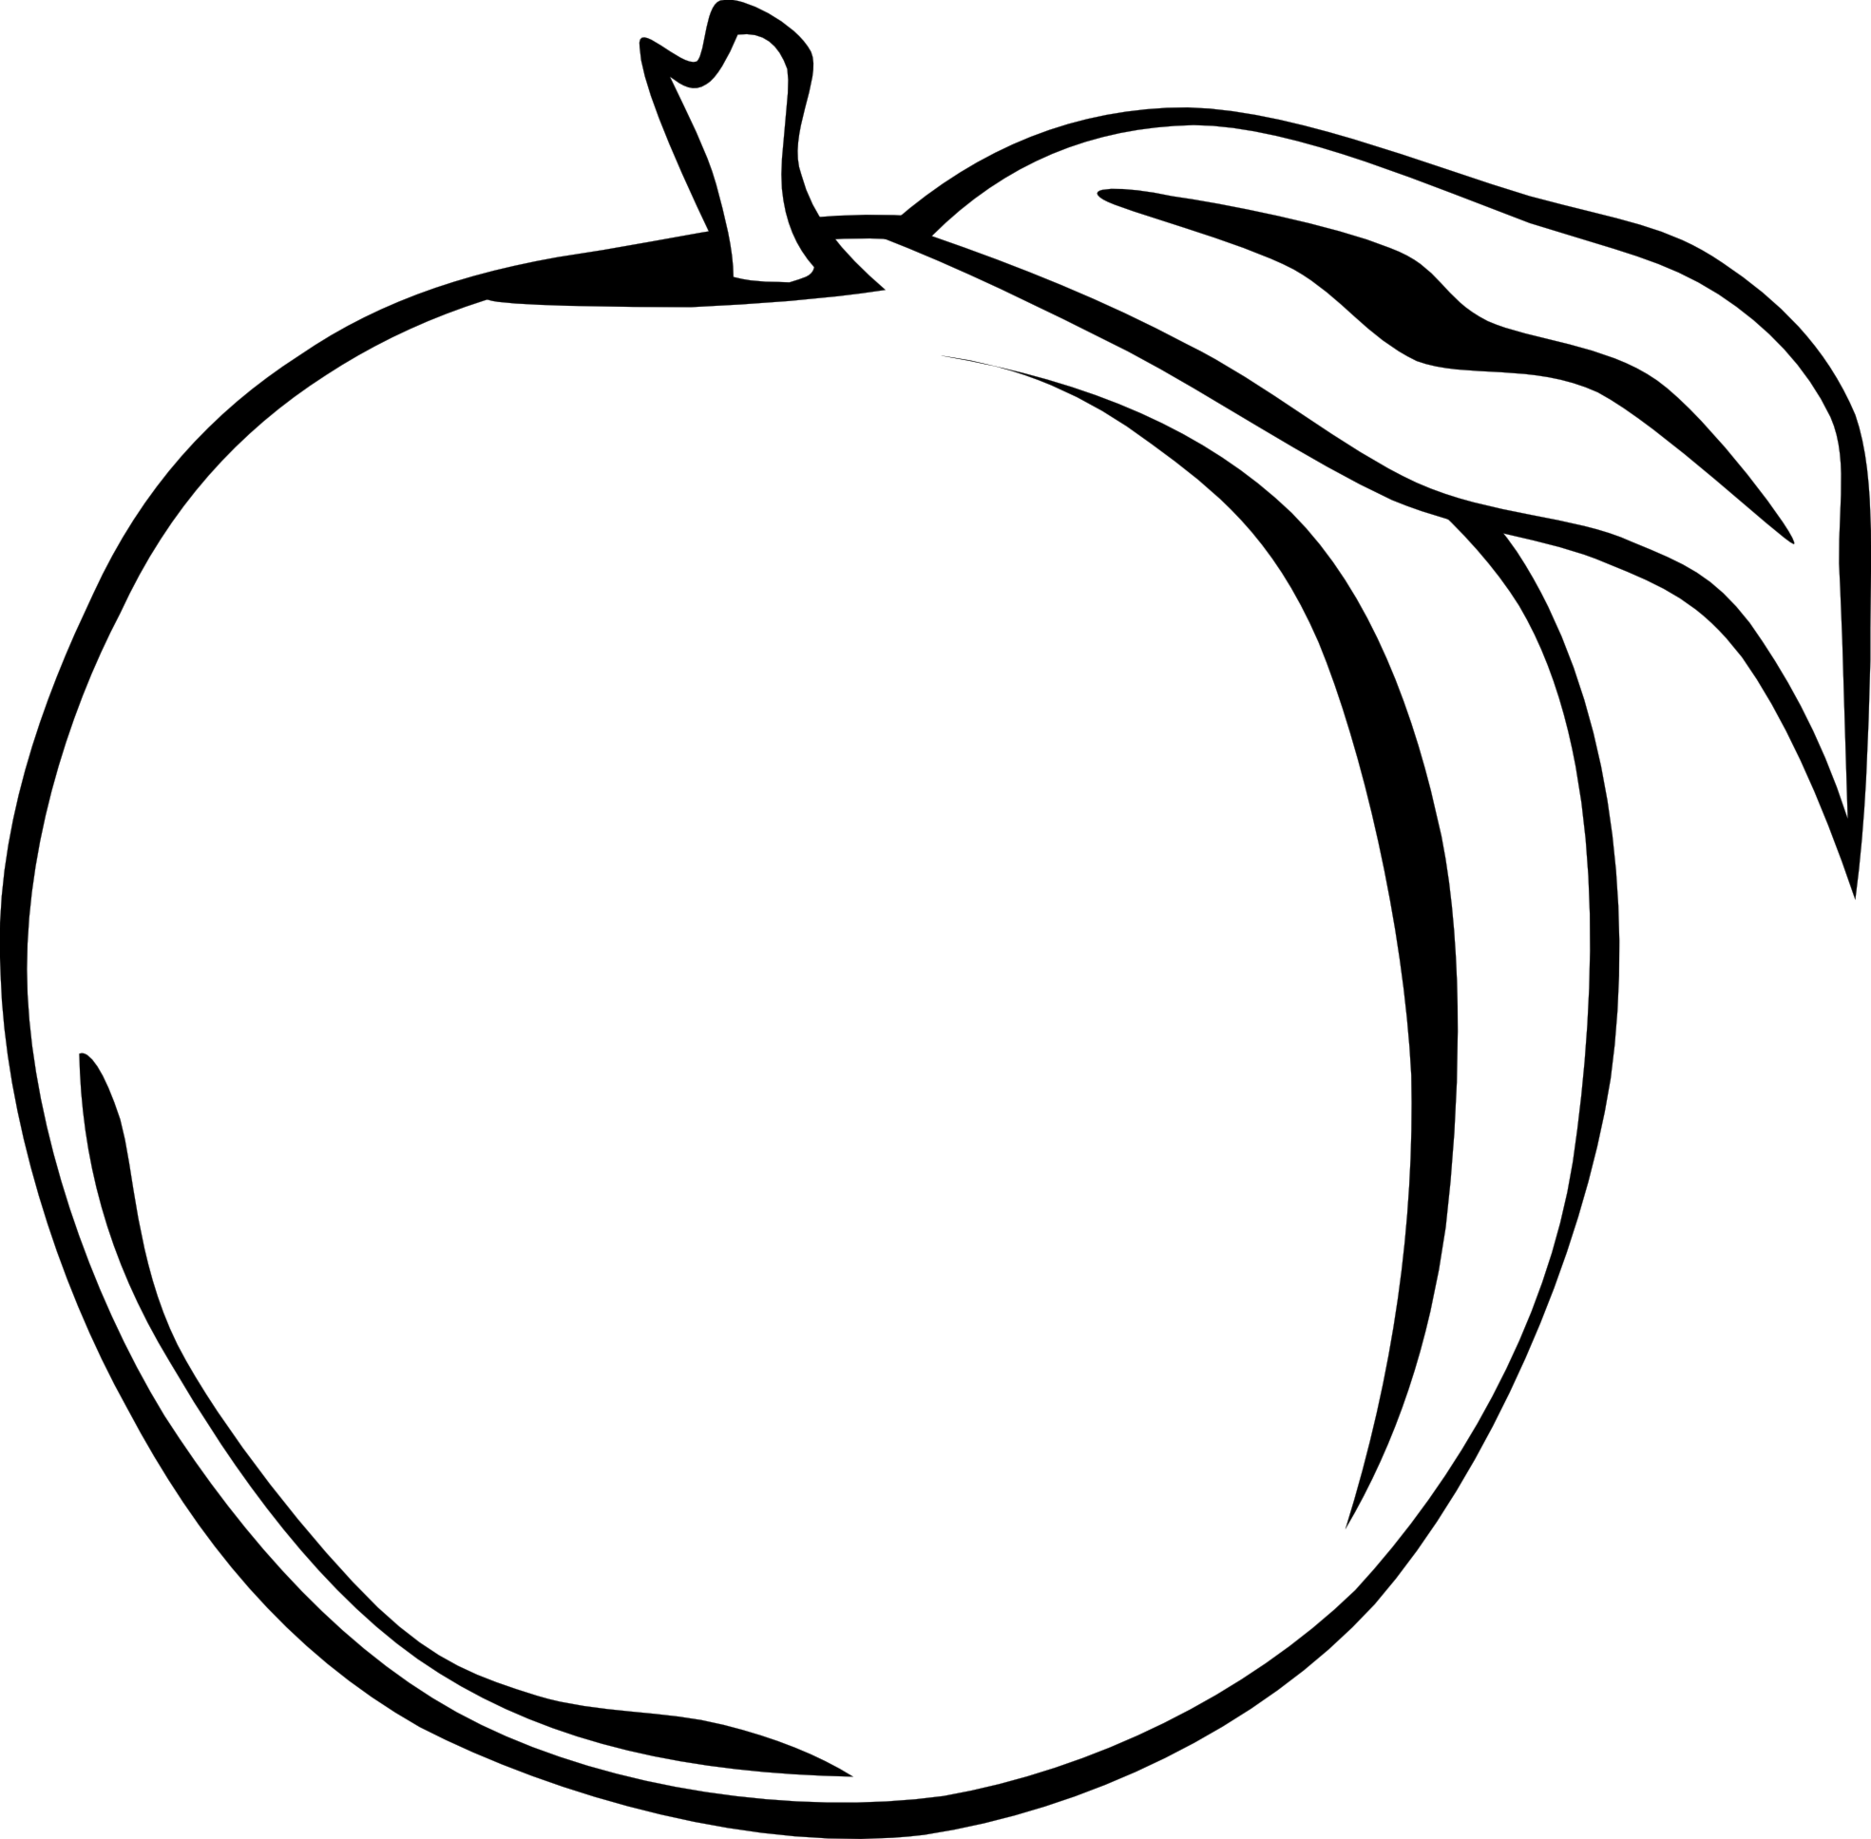 Clipart of fruits black and white.